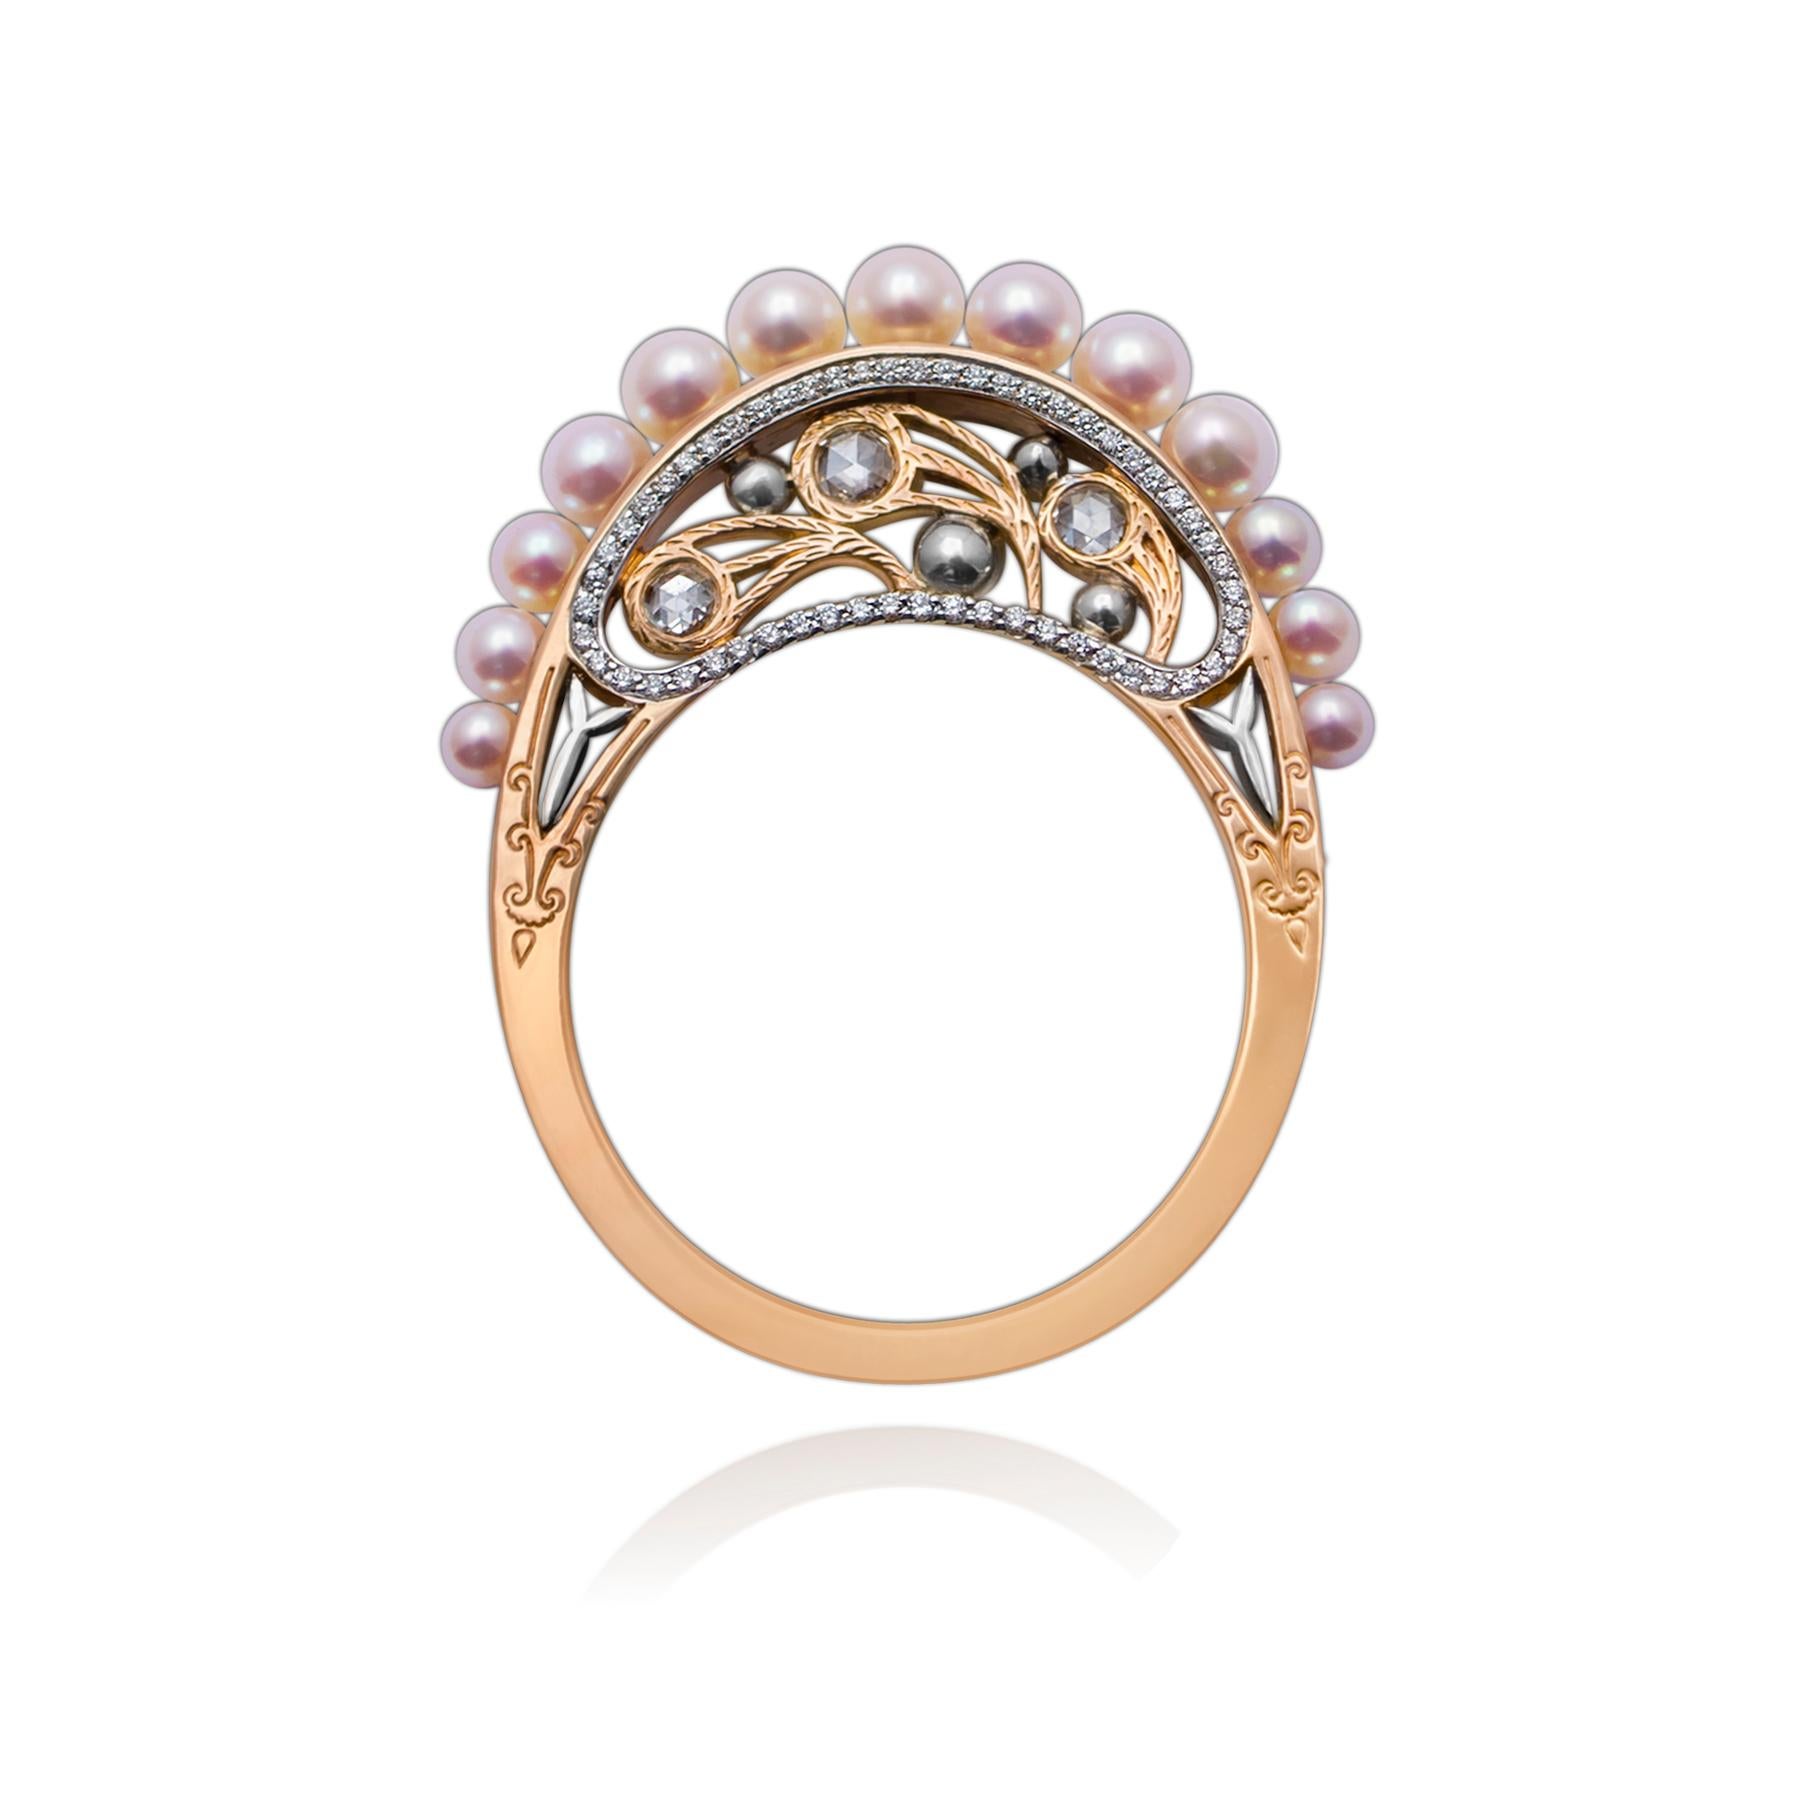 White Gold Ring 5.08 gms: White Diamonds 0.41 cts, Baby Akoya Silver 13 pcs (from 3.5 mm to 2.2 mm)                           SIZE: EU 54, US 7.00 
Rose Gold Ring 4.51 gms: White Diamonds WD 0.41 cts, Baby Akoya Silver 13 pcs (from 3.5 mm to 2.2 mm)